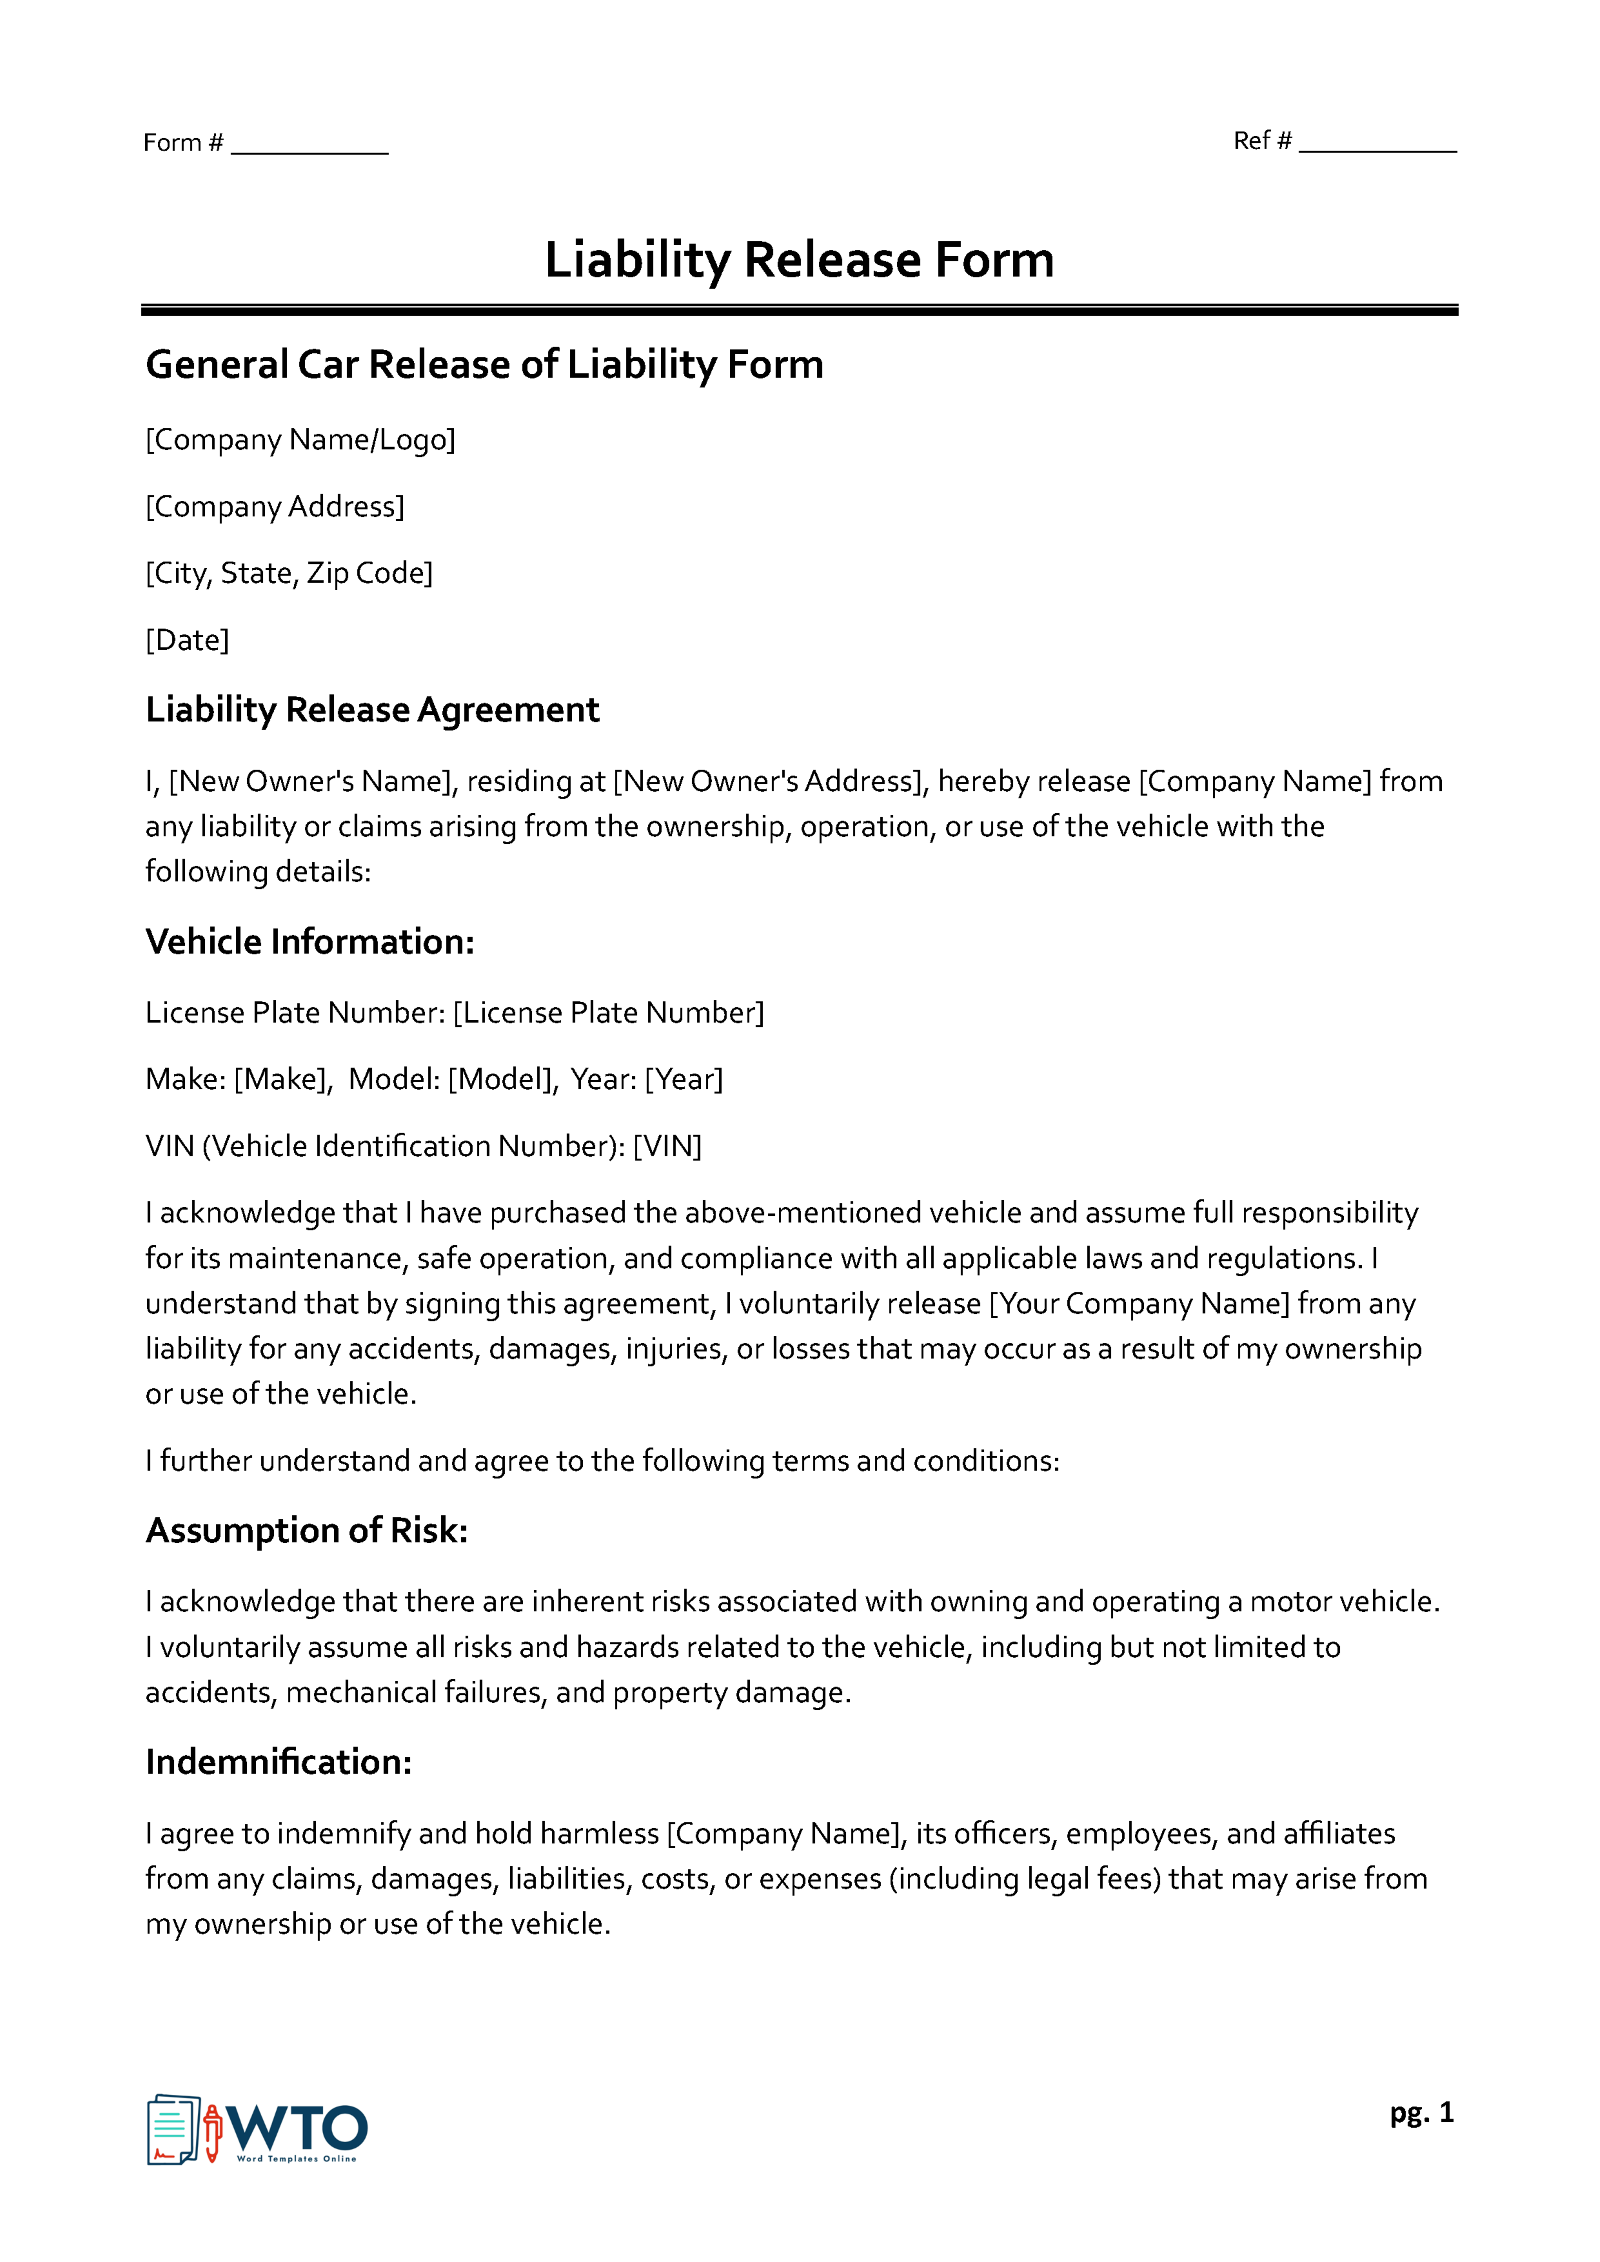 Free Downloadable Vehicle Release of Liability Form for Word Document